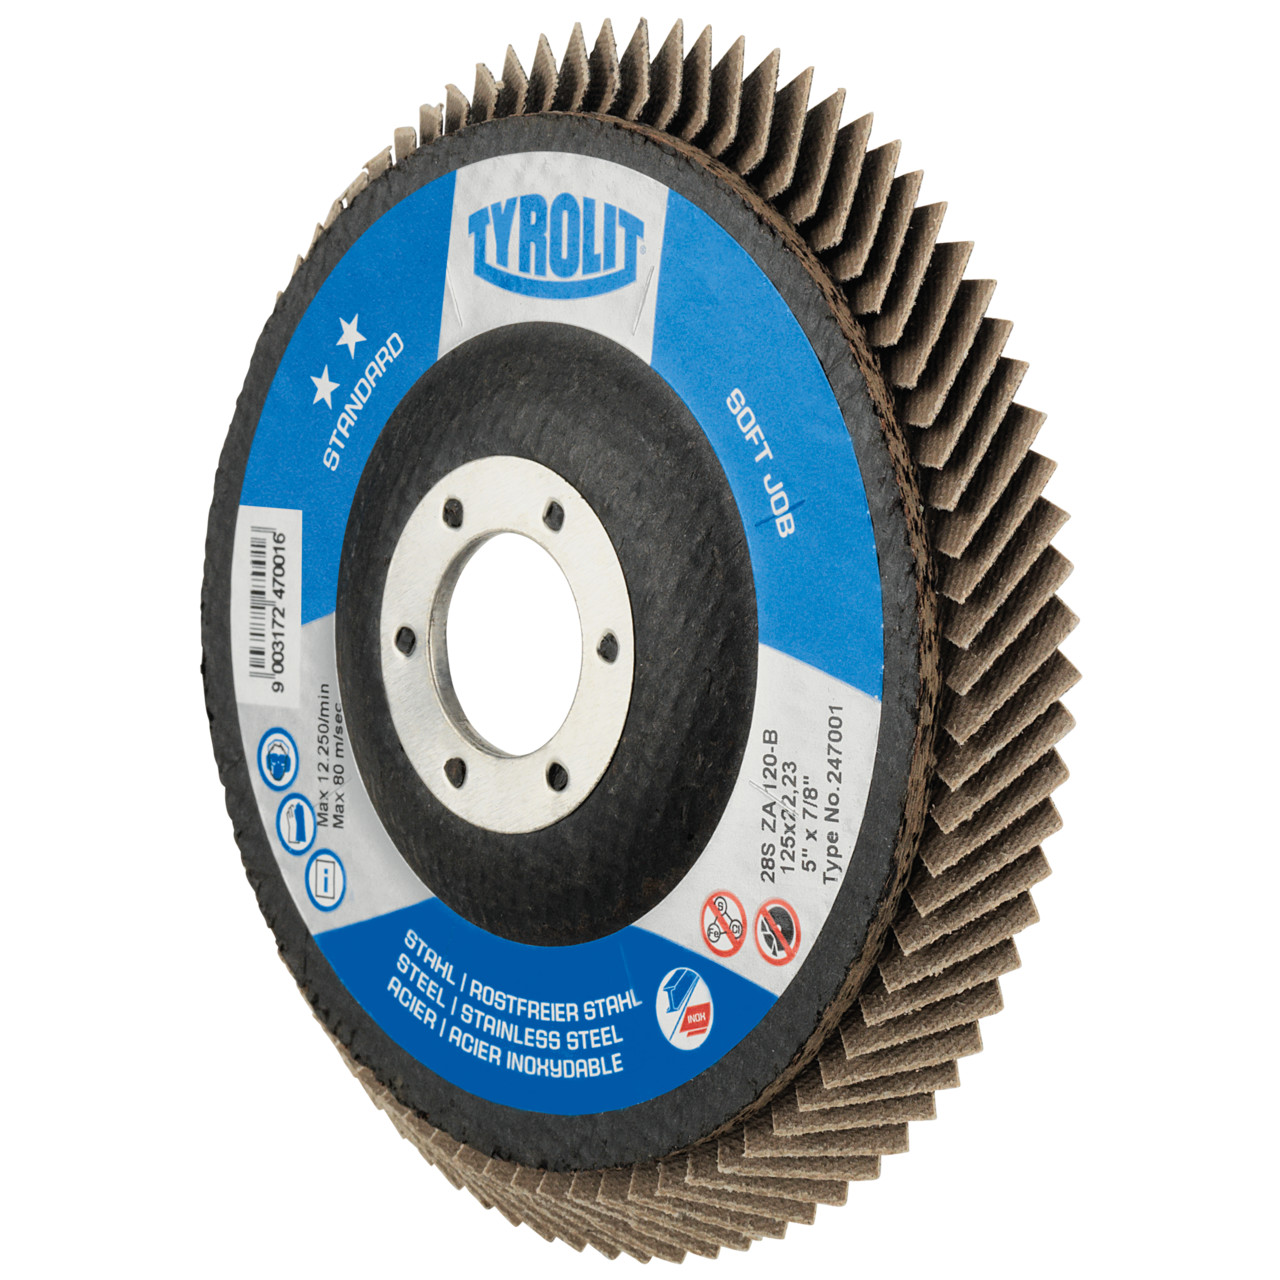 Tyrolit SOFTJOB DxH 115x22.23 2in1 for steel and stainless steel, P40, shape: 28S - straight version (SOFTJOB flap disc), Art. 246987